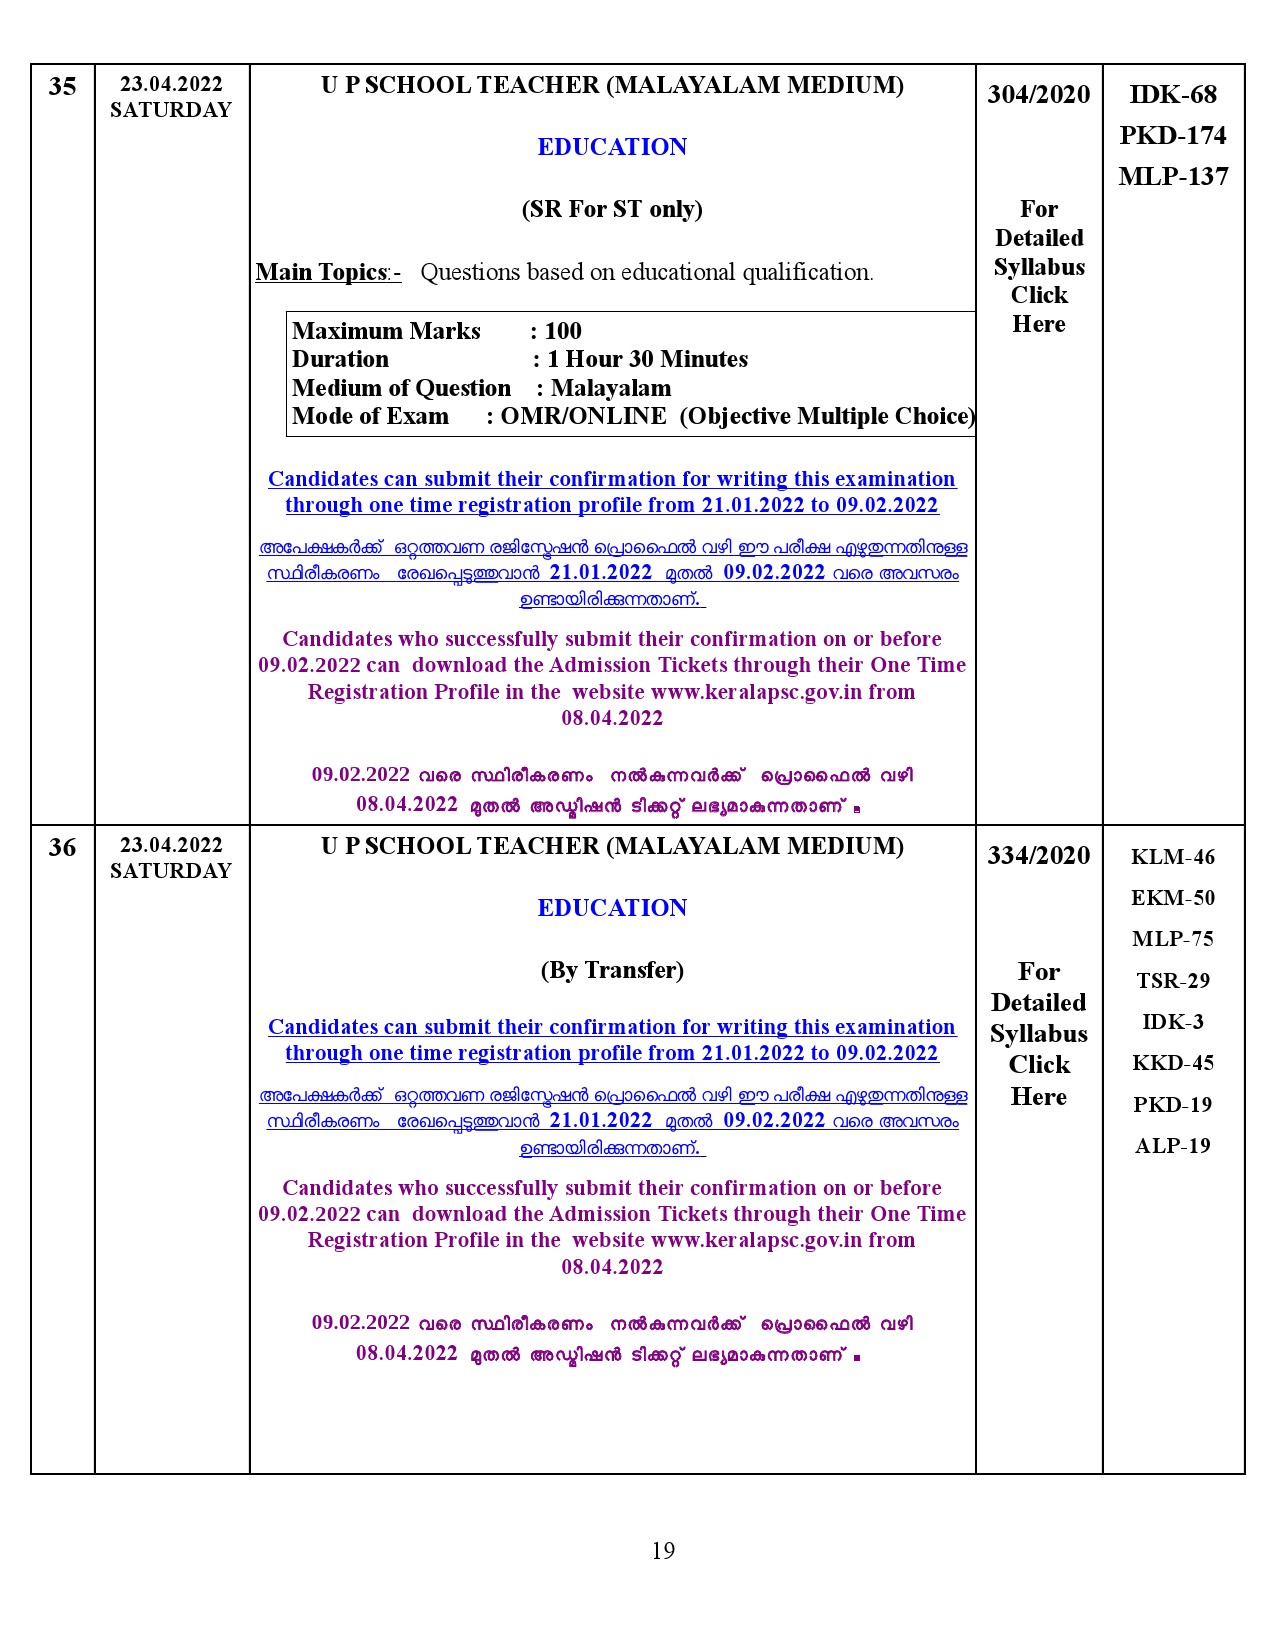 Examination Programme For The Month Of April 2022 - Notification Image 19